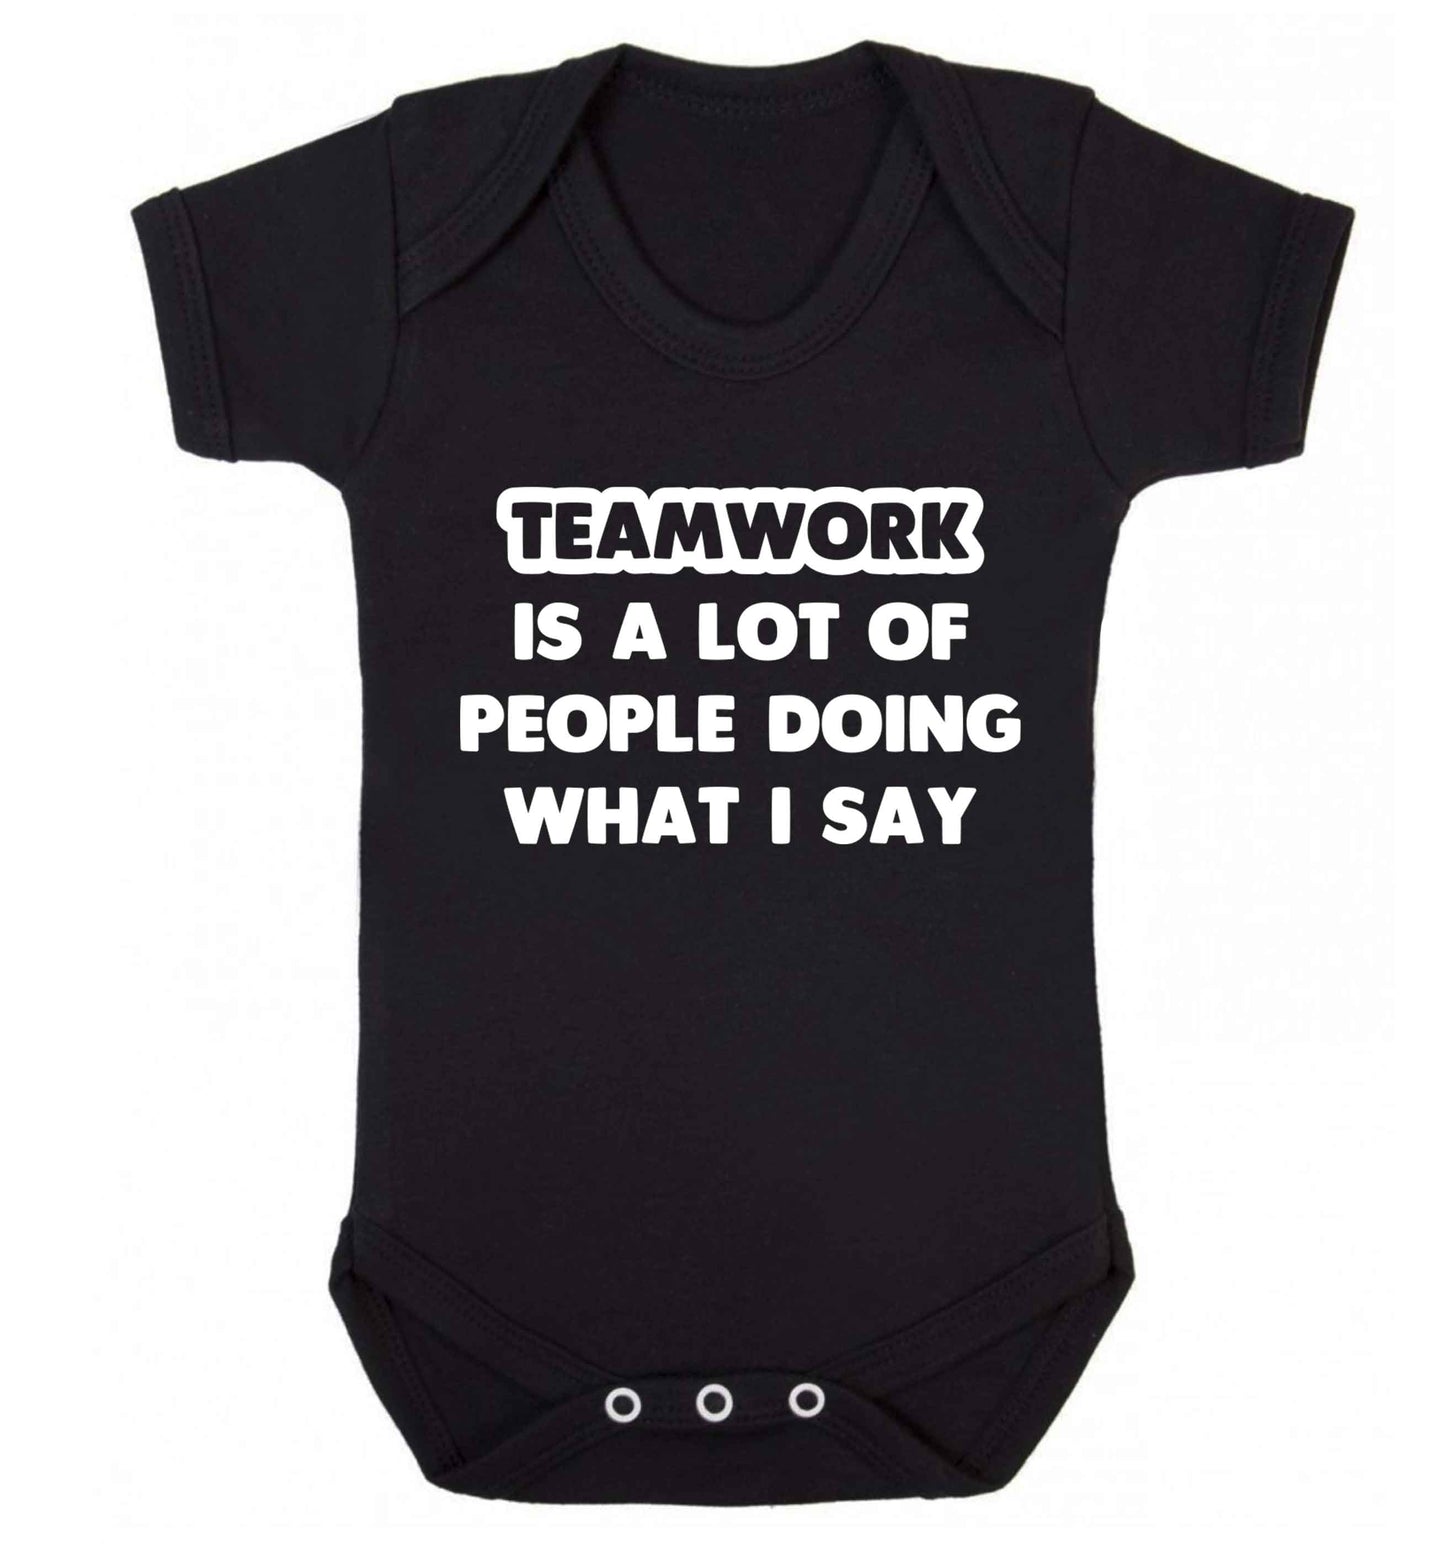 Teamwork is a lot of people doing what I say Baby Vest black 18-24 months